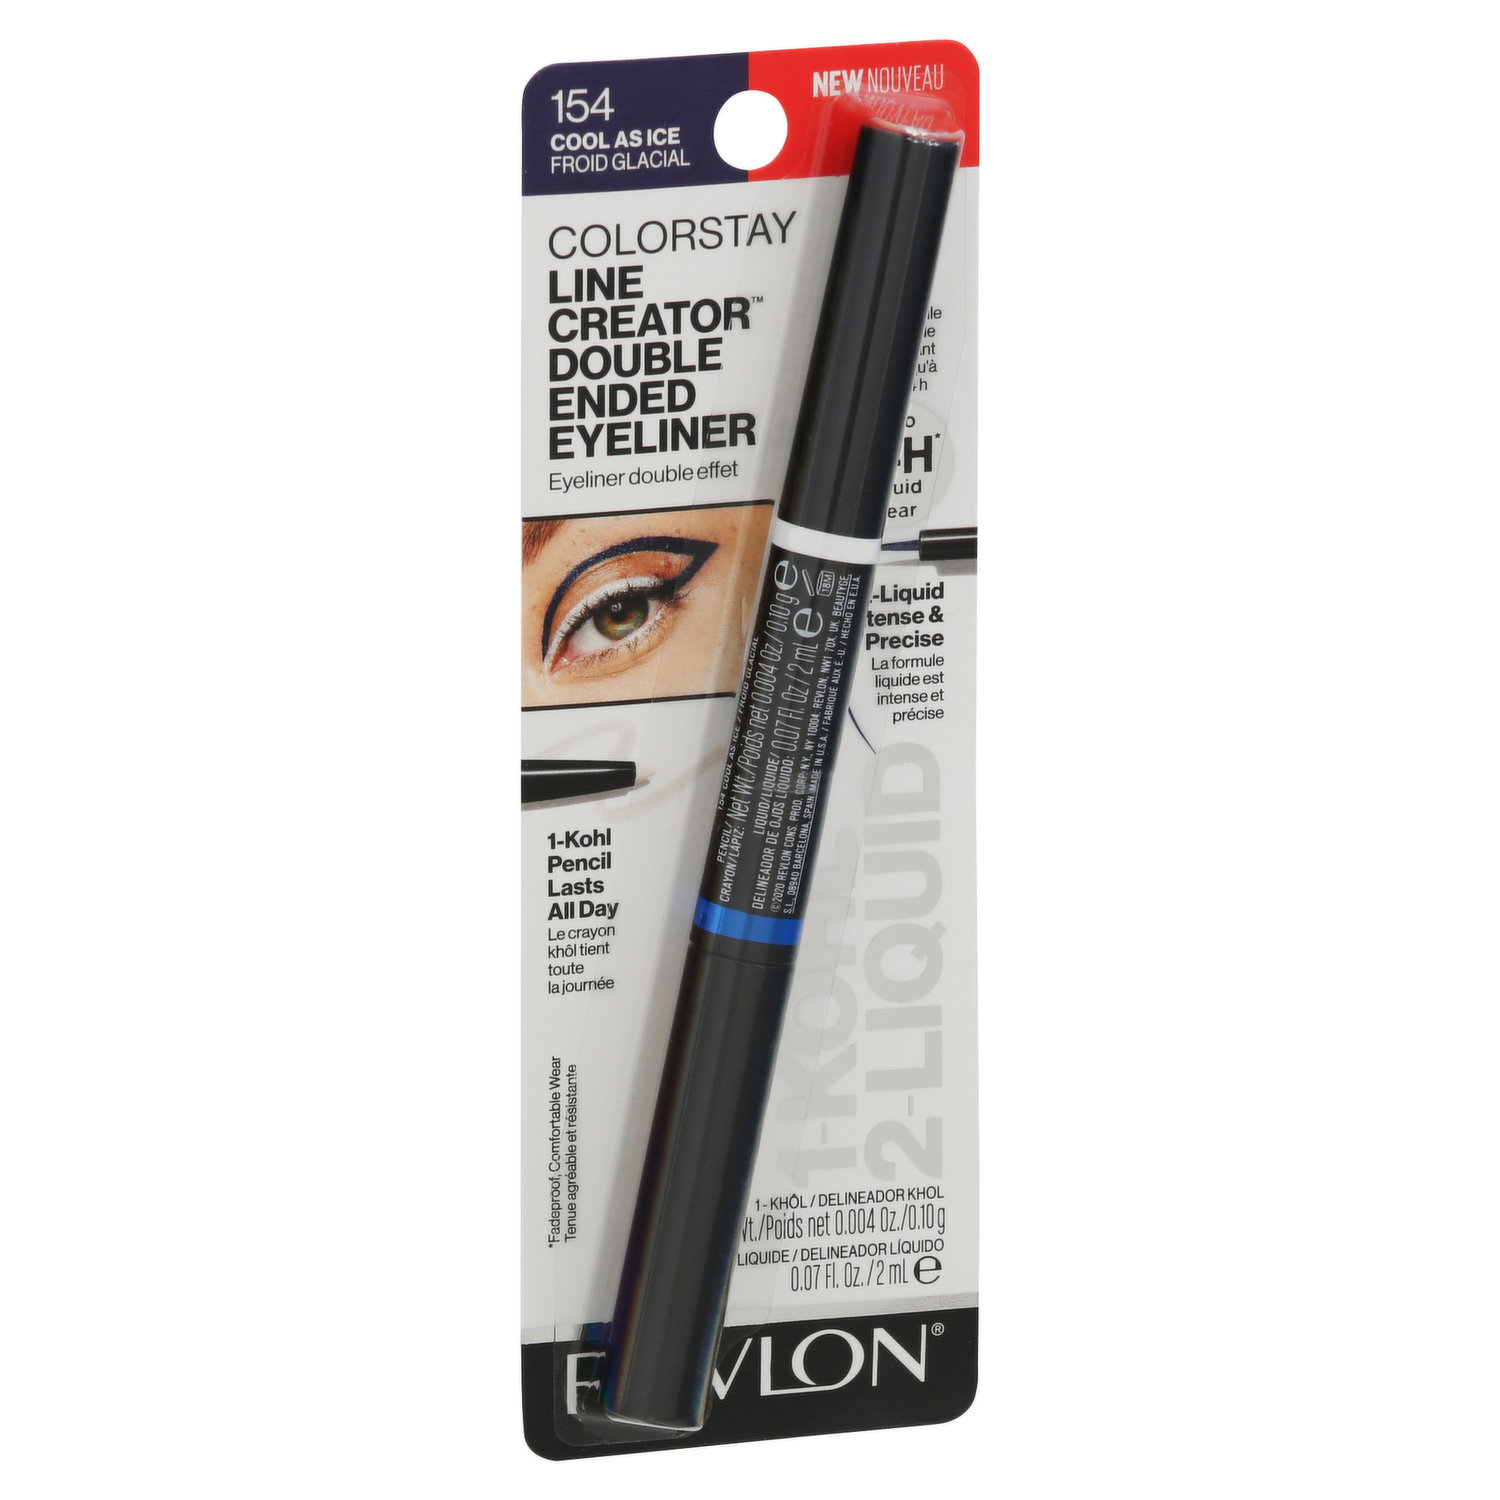 ColorStay Line Creator Eyeliner, Double Ended, 154 Cool As Ice, 1 